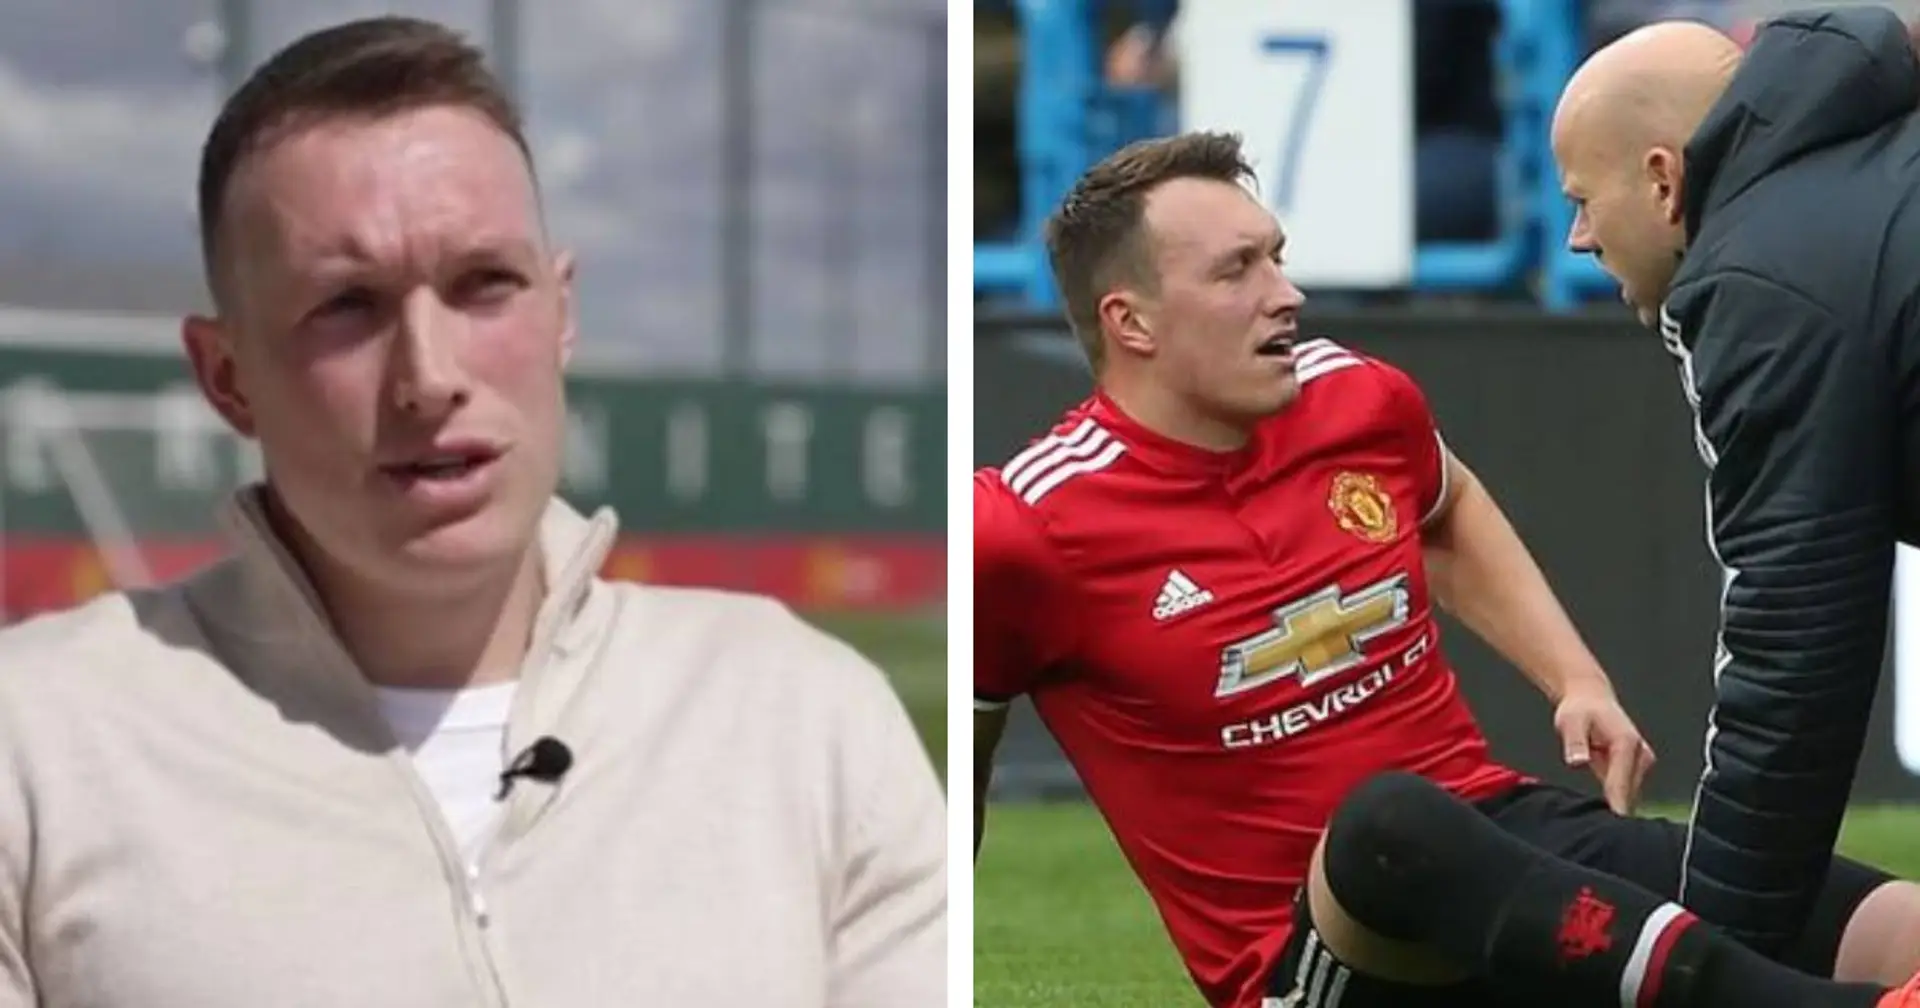 'Only my mum and dad would turn up': Recalling what Phil Jones said about potential Man United testimonial